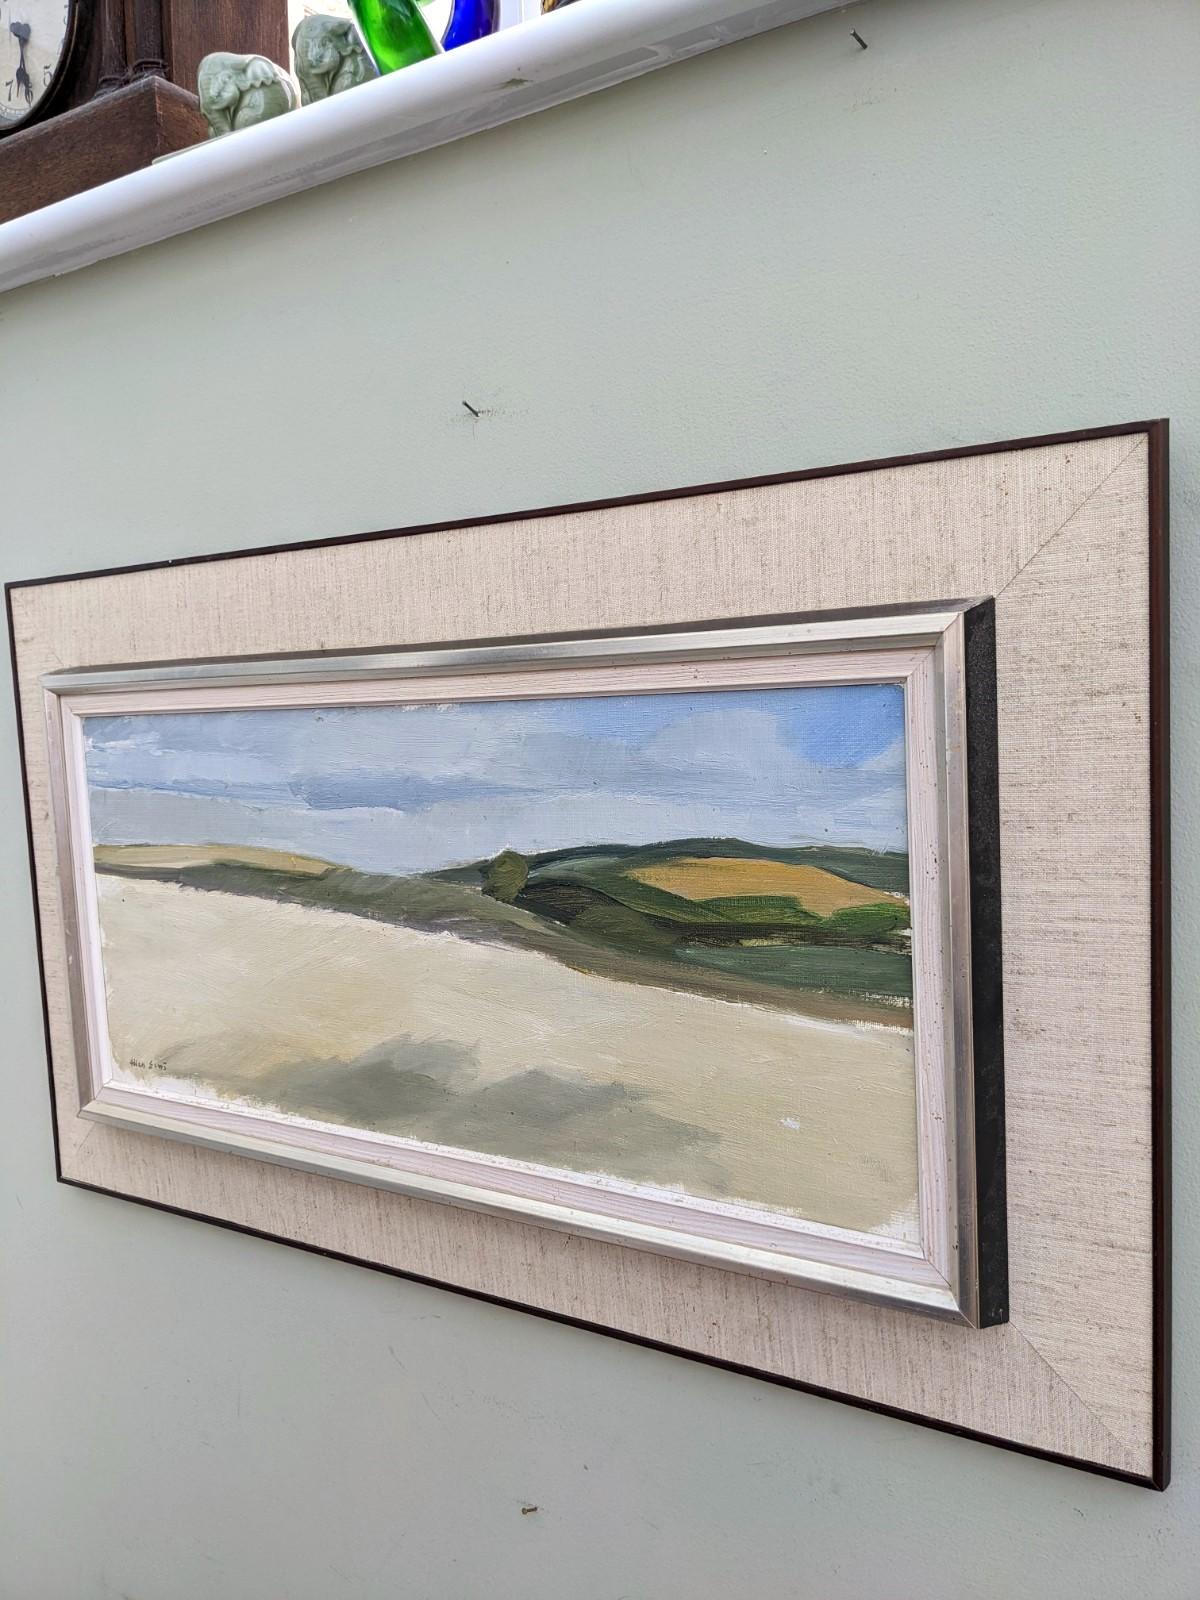 PANORAMA
Size: 44 x 75 cm (including frame)
Oil on canvas

A panoramic mid century modernist landscape composition in oil, painted onto canvas.

This restful composition depicts a far reaching landscape sitting under blue skies. The artist has used